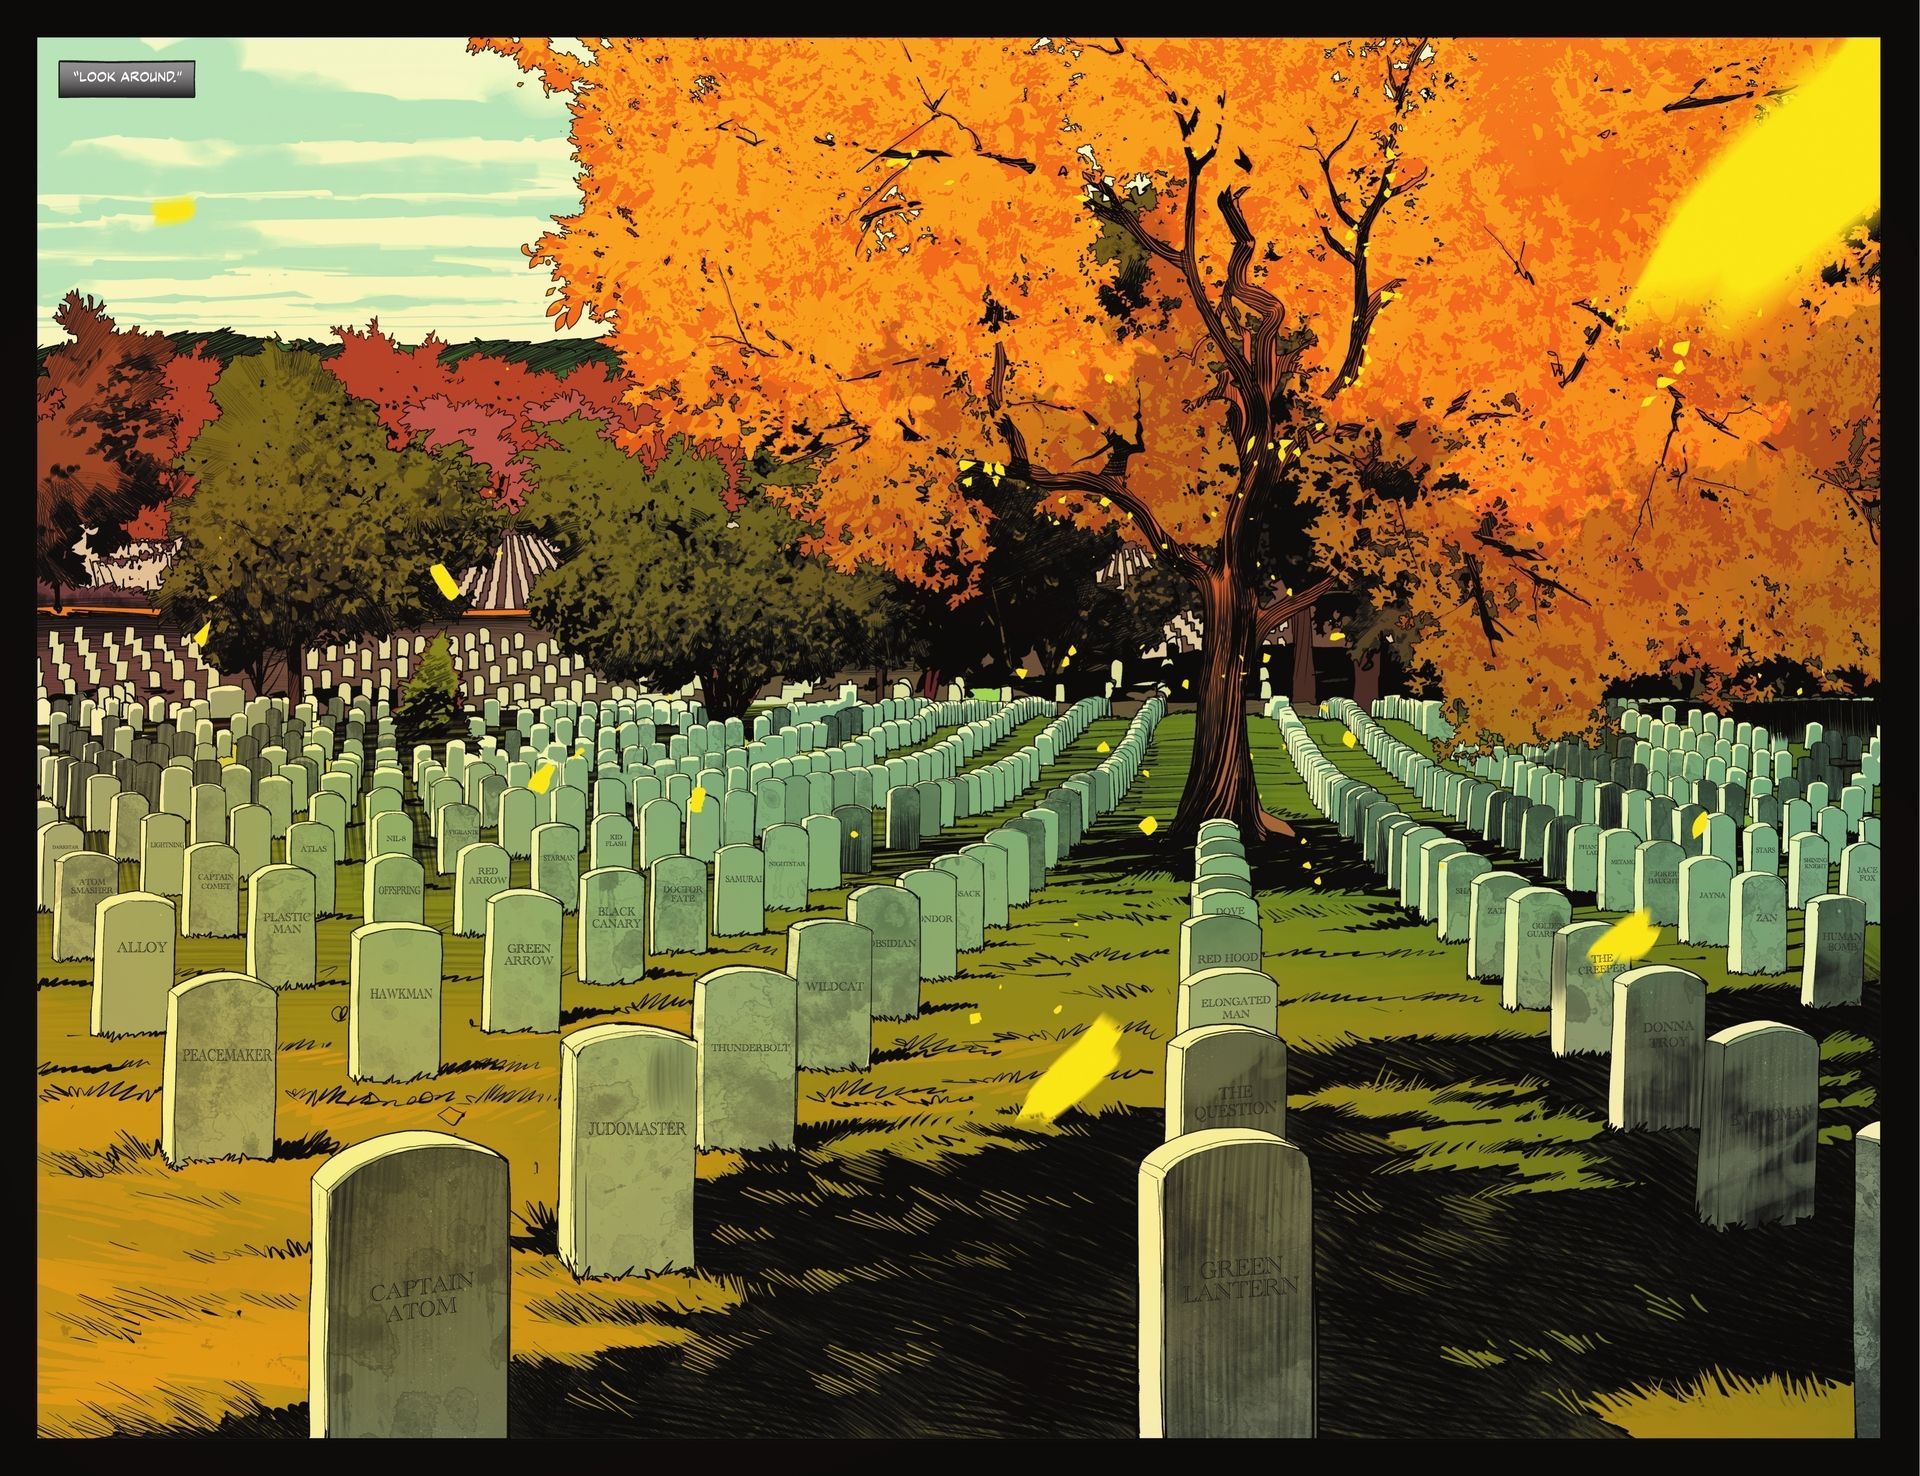 Batman and Superman see Kingdom Come's graveyard of heroes